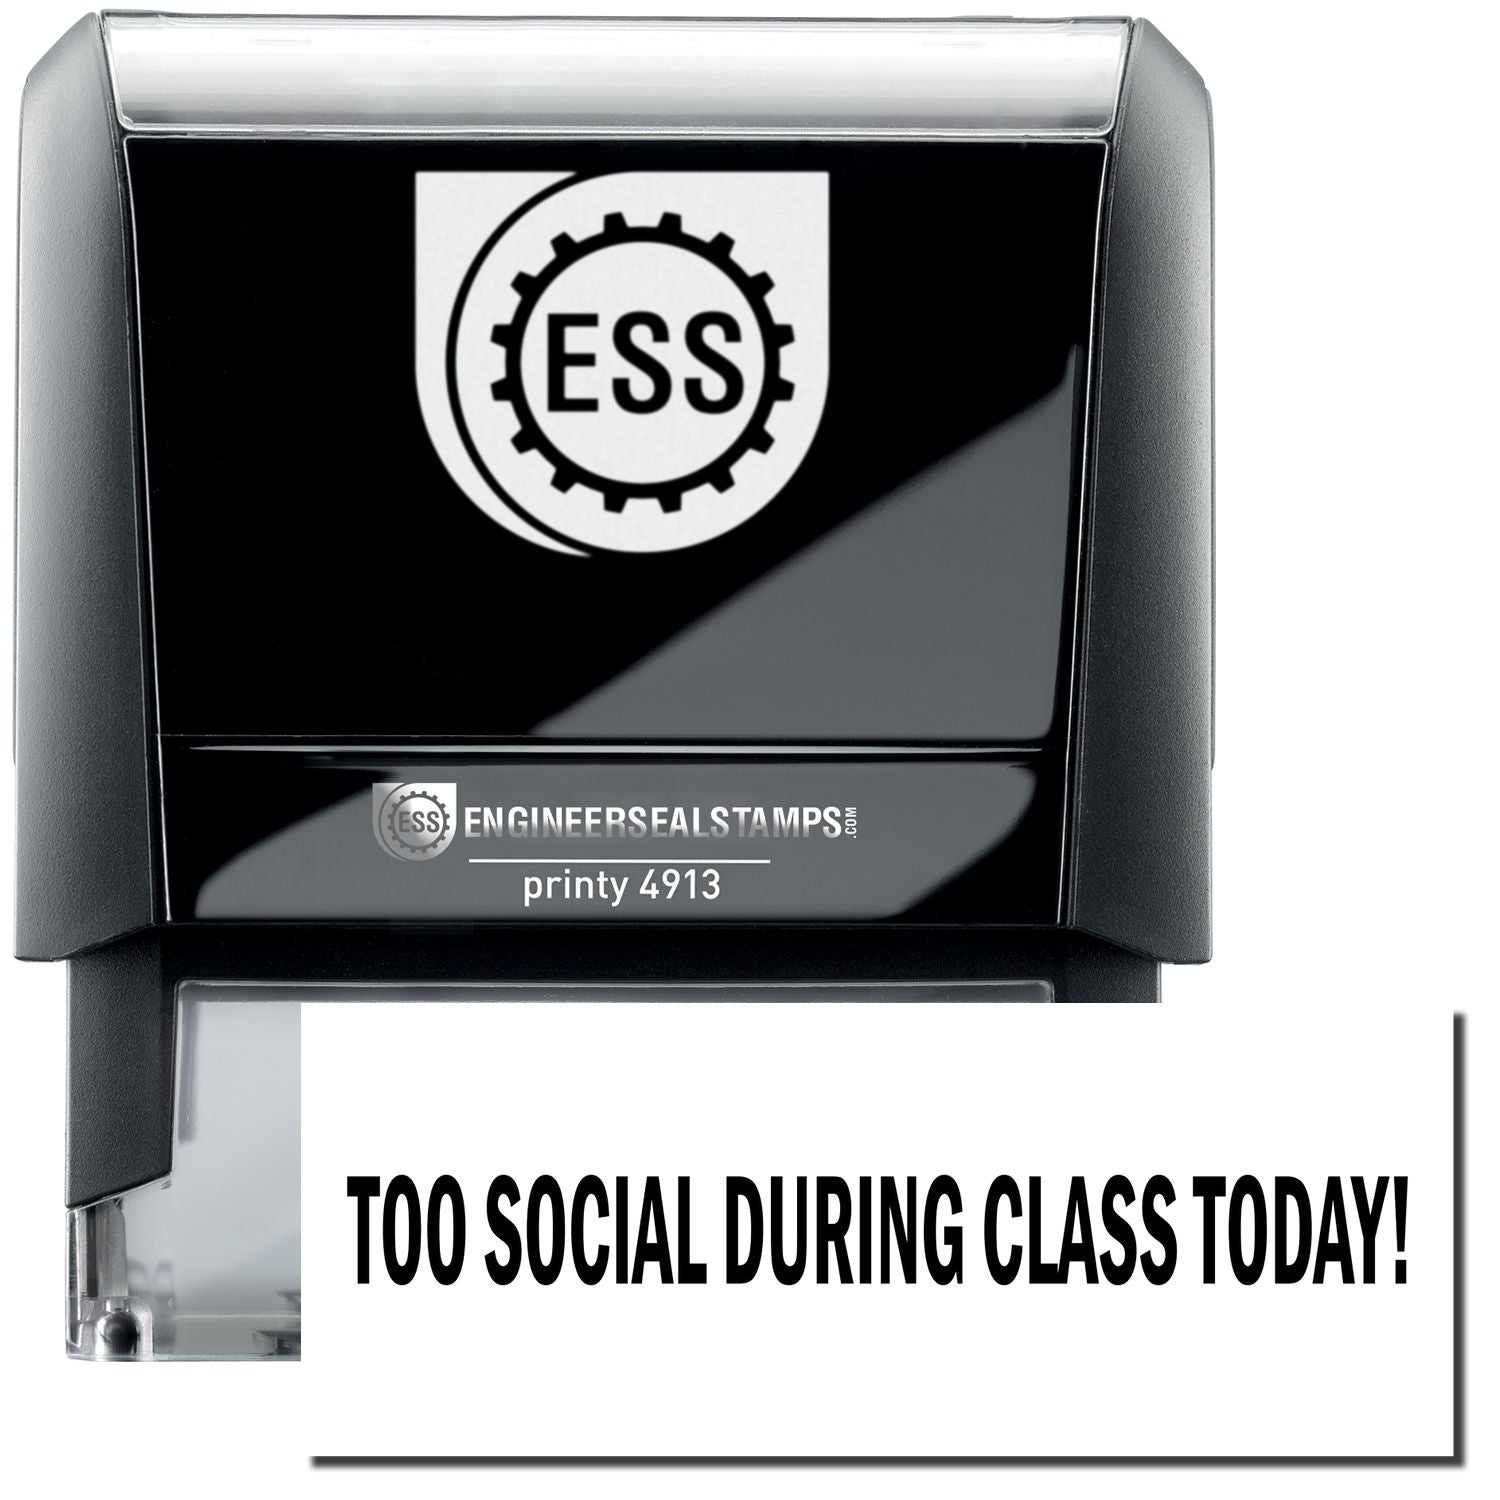 A self-inking stamp with a stamped image showing how the text "TOO SOCIAL DURING CLASS TODAY!" in a large bold font is displayed by it after stamping.